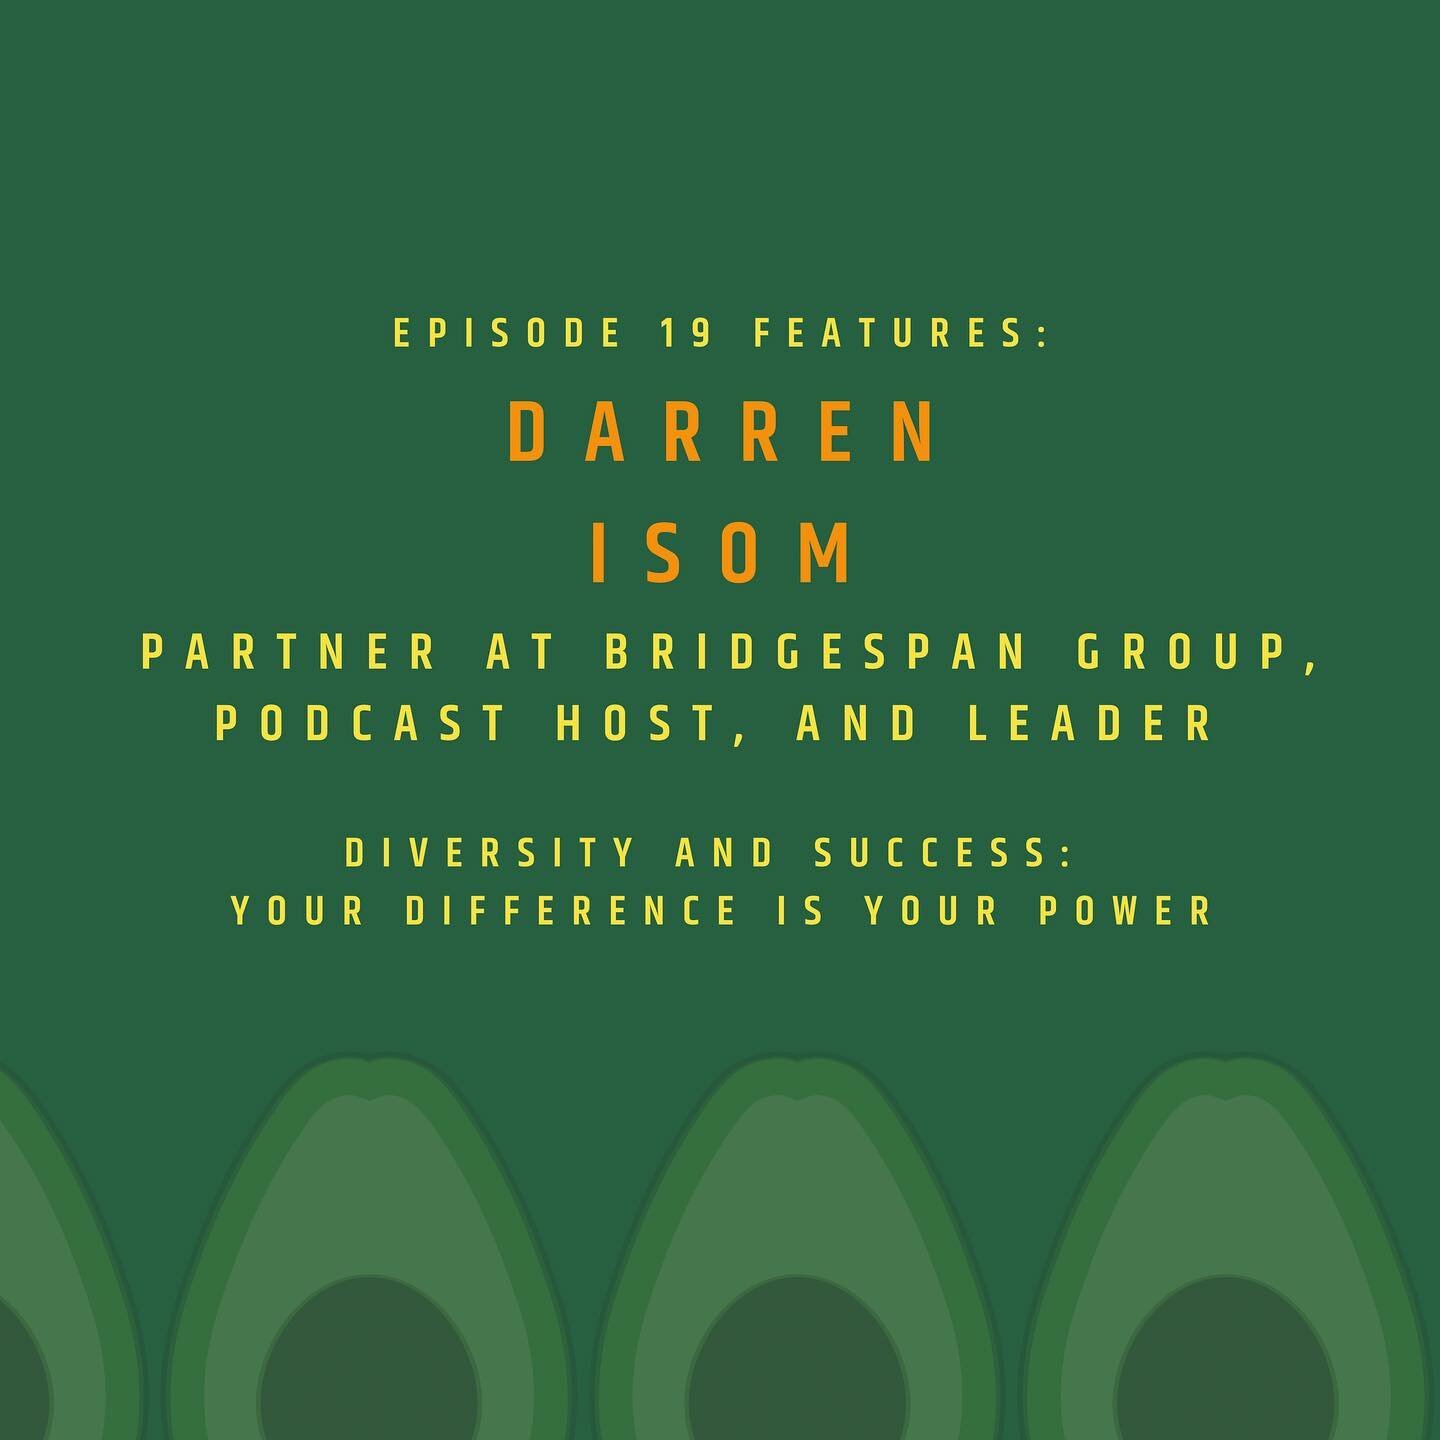 If you've ever experienced shrinking yourself to fit in or feeling the need to hide who you are, then this episode is for you. And, if you are a leader wanting to build a diverse, inclusive, and inspiring culture and organization, this episode is als